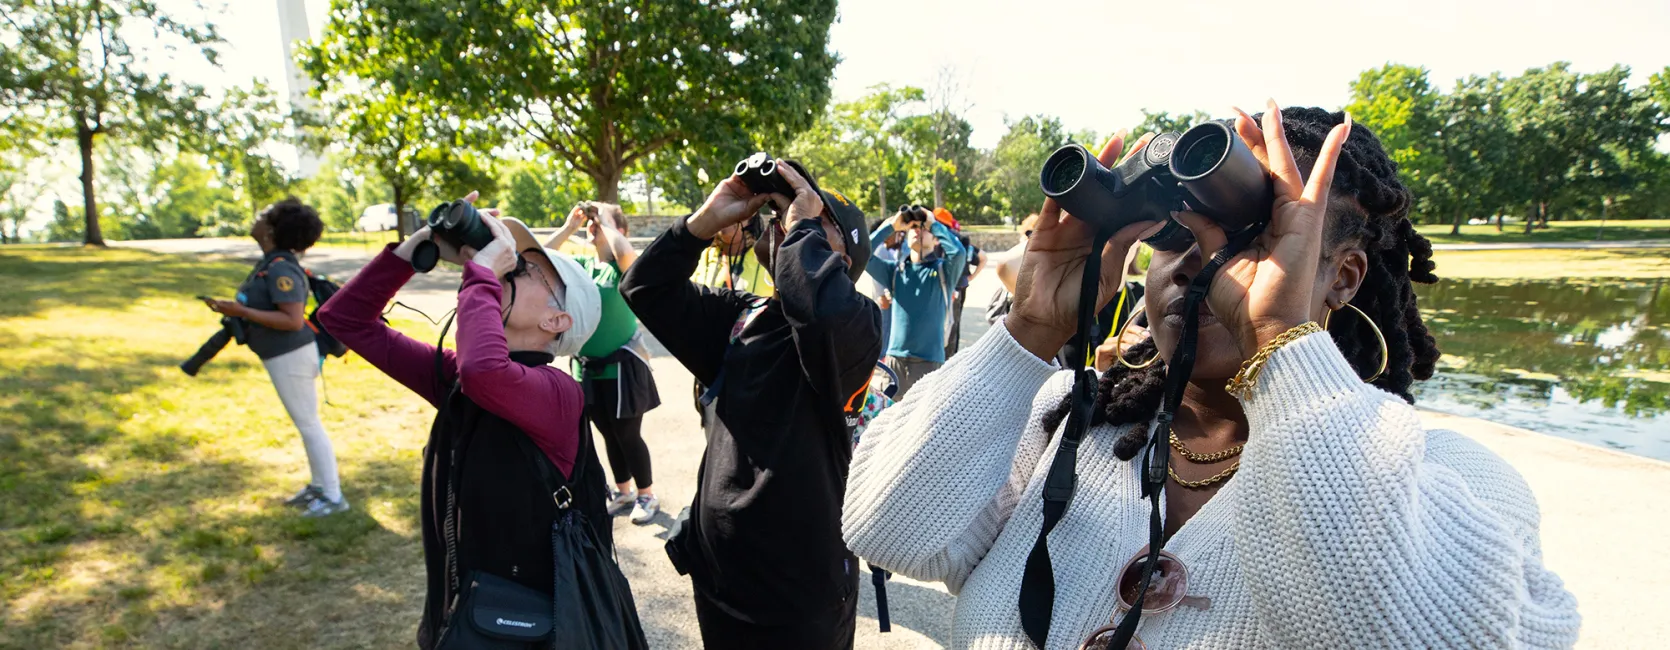 A group of about eight people, including some medium- and light-skinned people, standing on a path on the National Mall and looking up through binoculars. One woman is holding a camera. The Washington Monument is in the background along with some green, leafy trees.